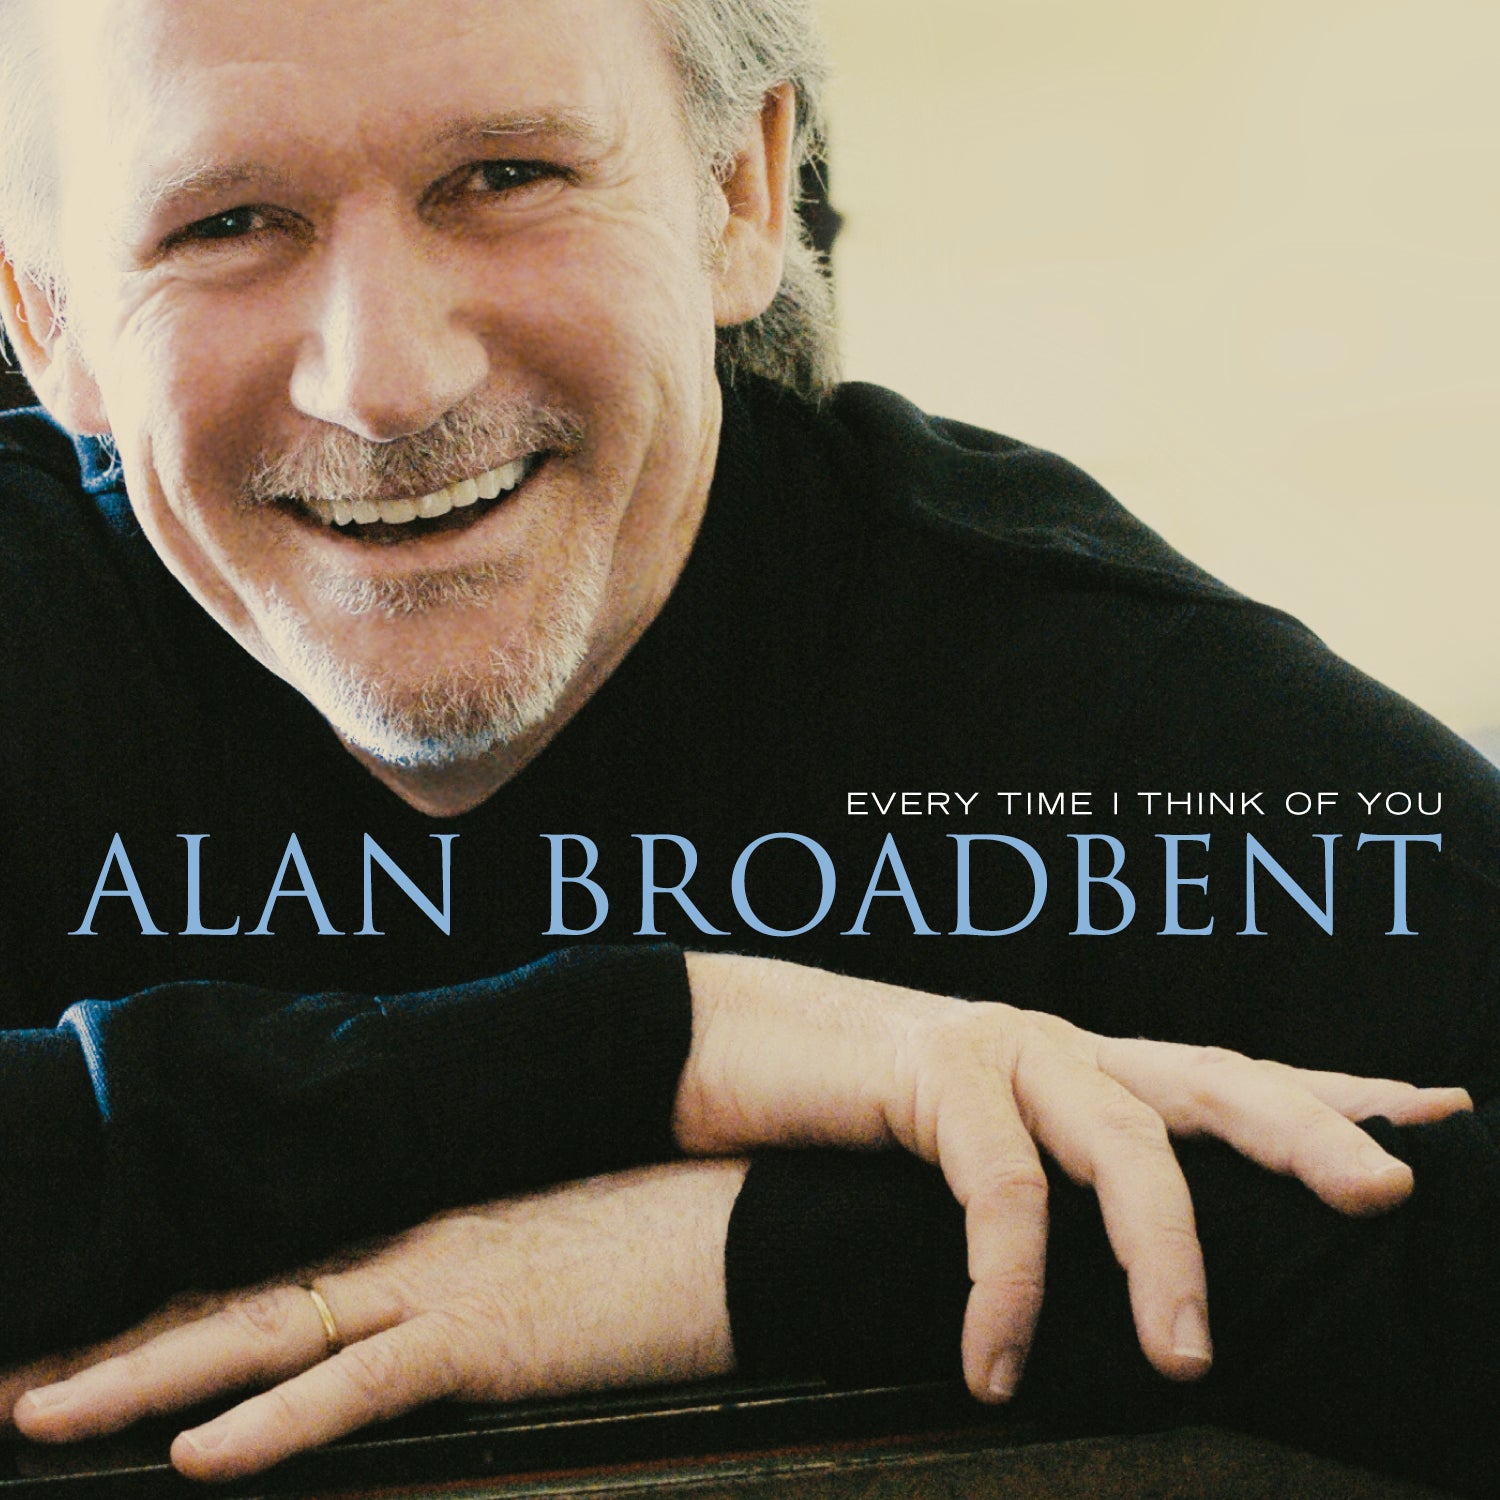 Alan Broadbent - Every Time I Think of You